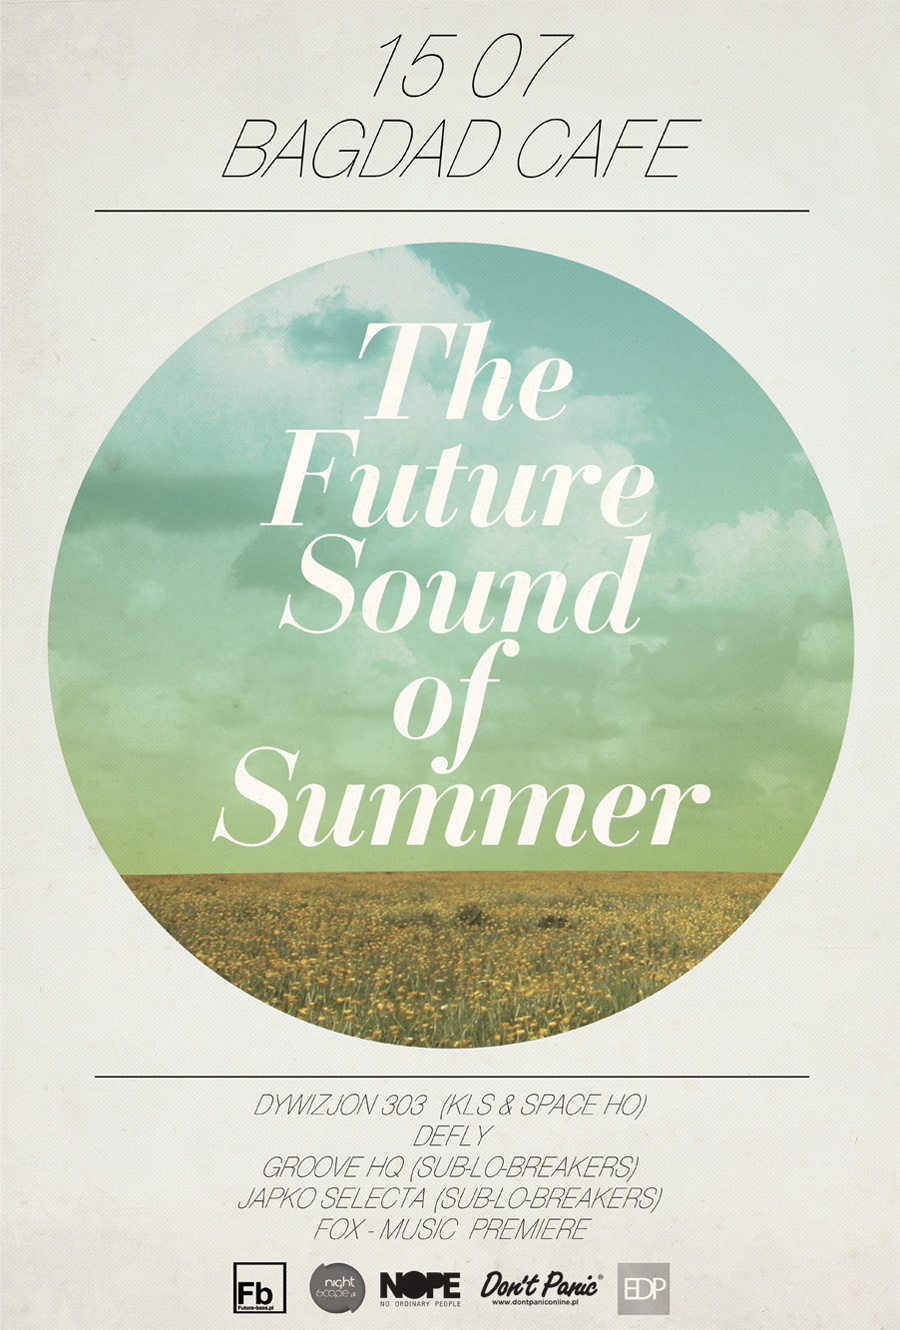 The Future Sound of Summer